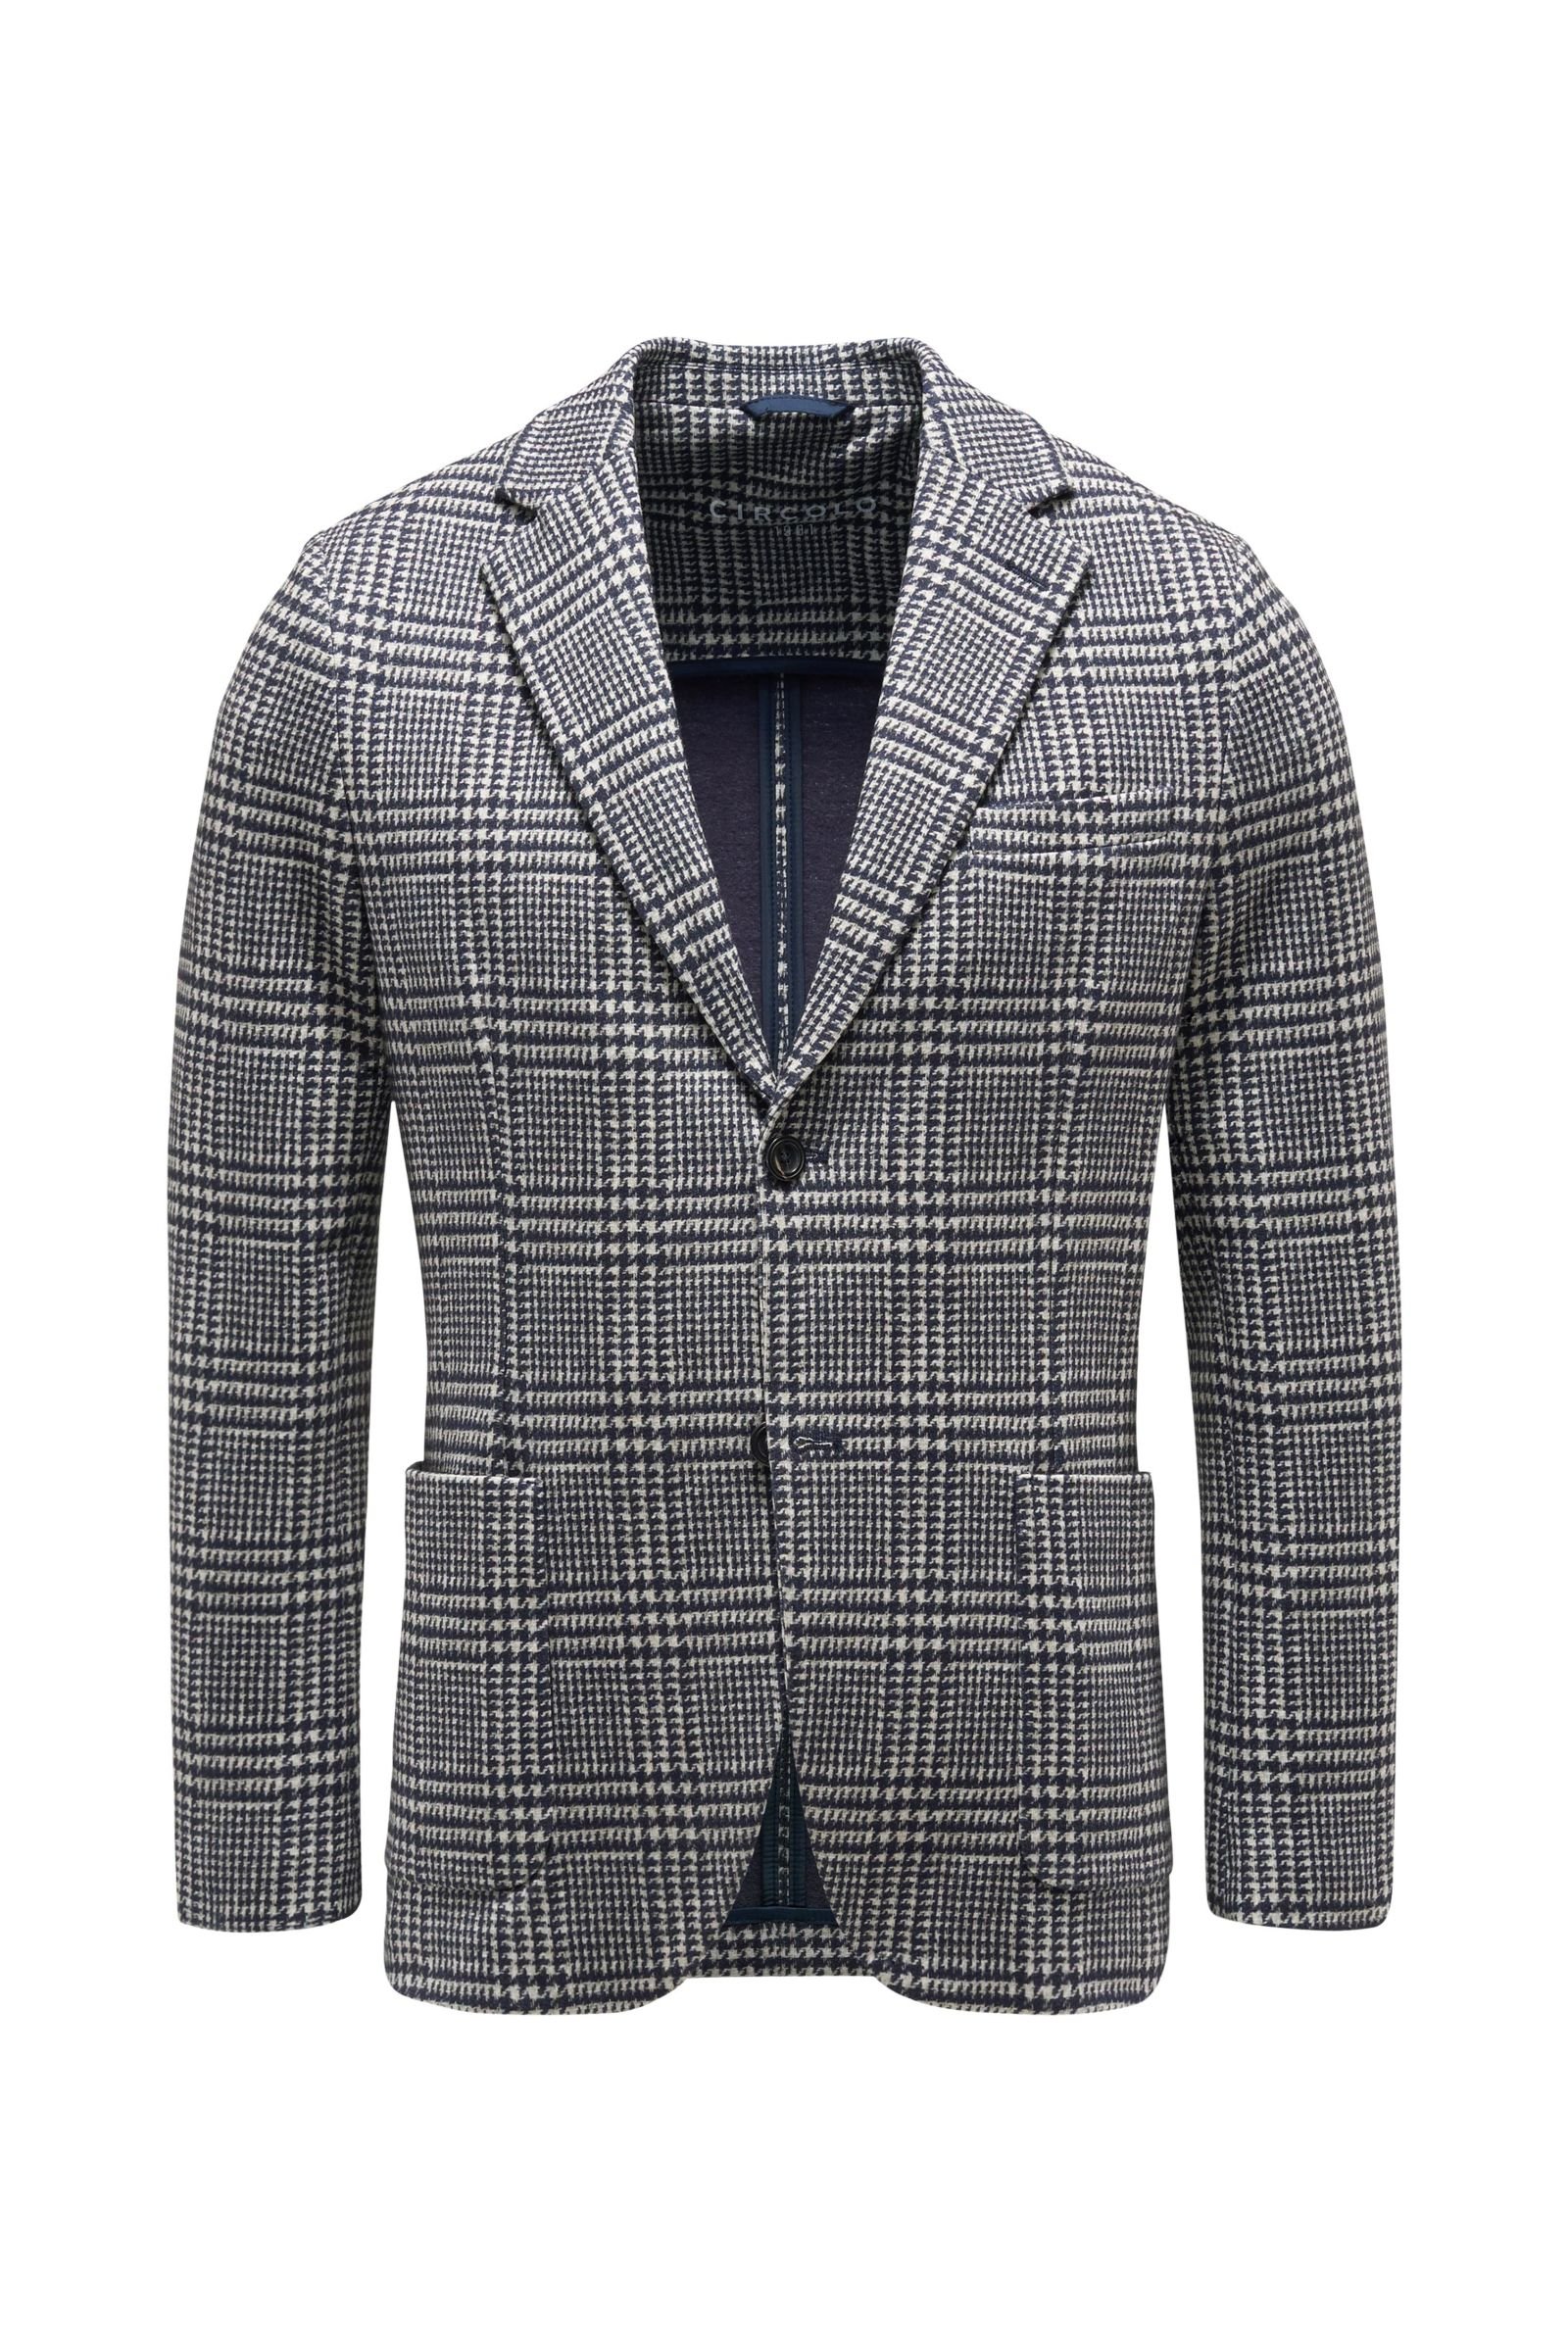 Jersey smart-casual jacket navy/off-white checked